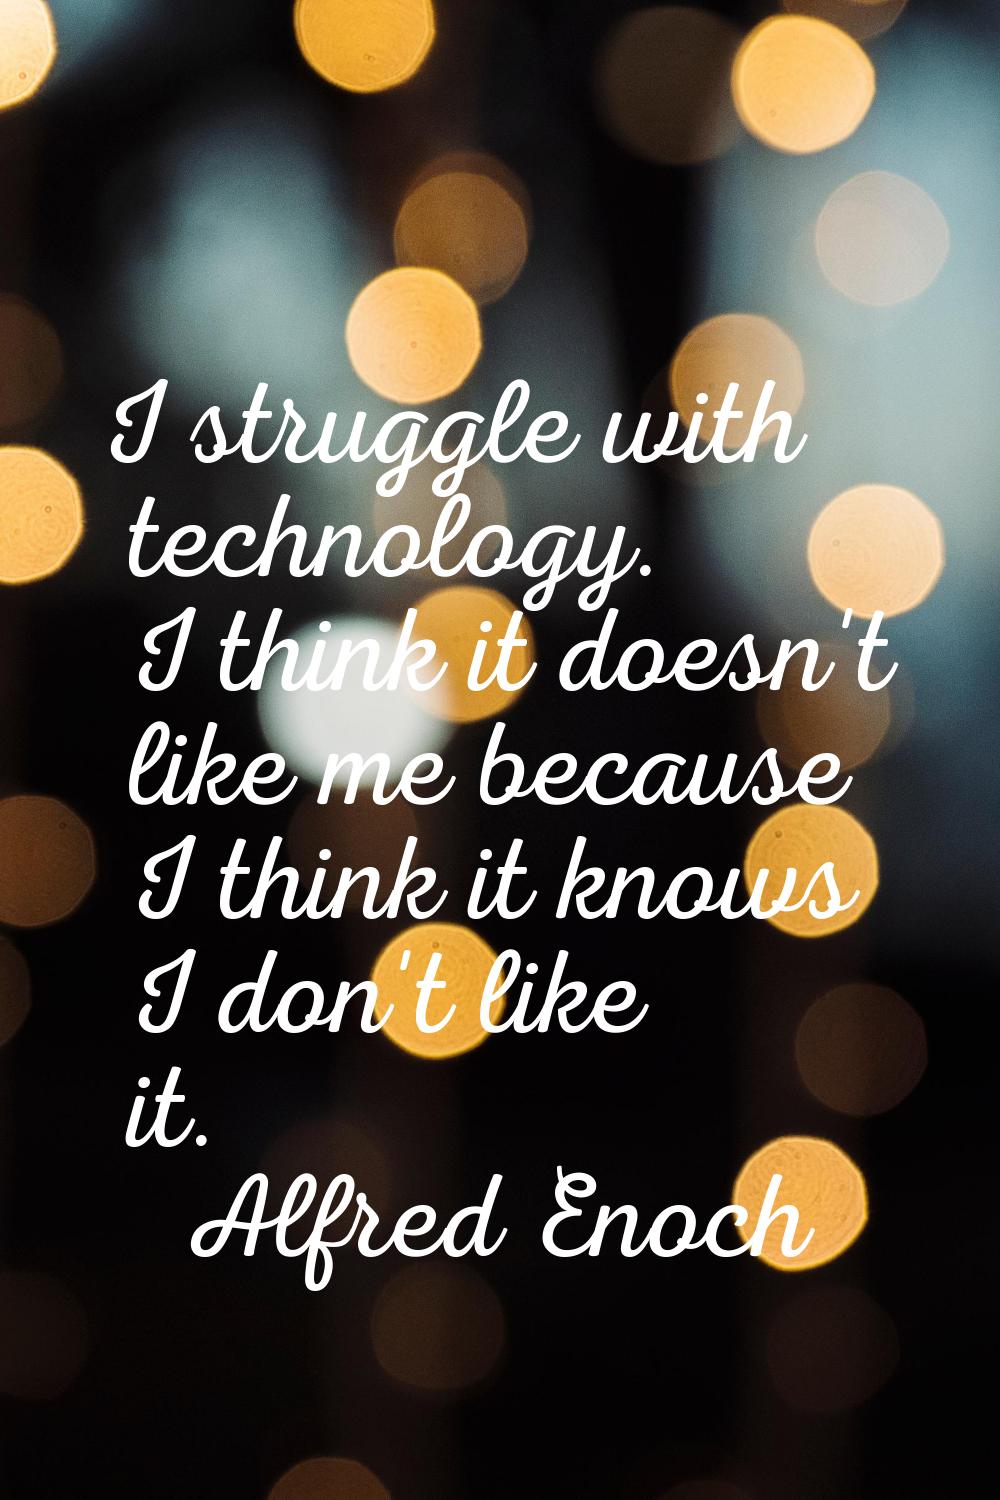 I struggle with technology. I think it doesn't like me because I think it knows I don't like it.